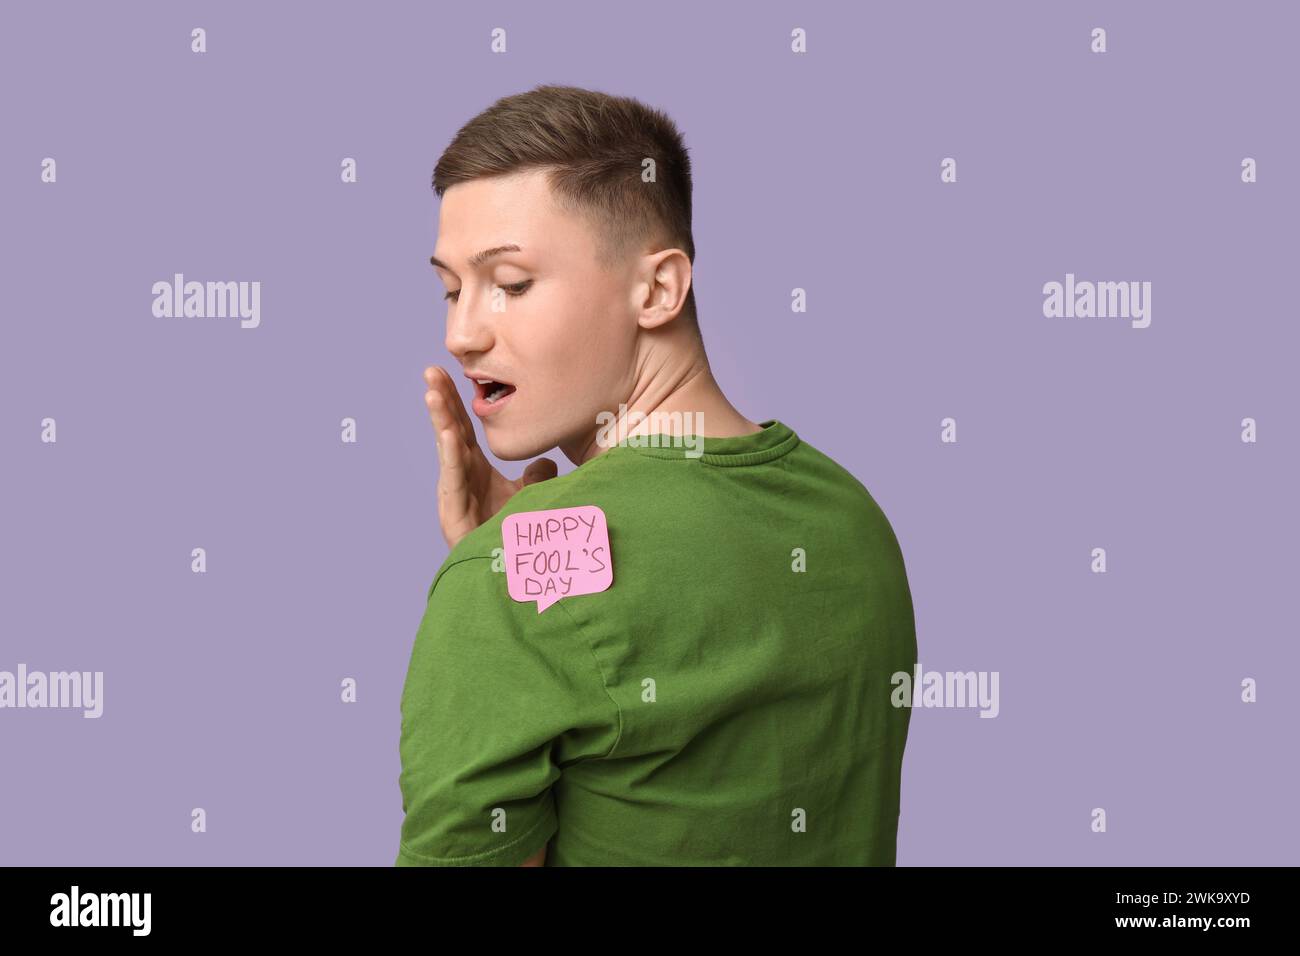 Handsome young shocked man with sticker attached to his back on purple background. April fool's day celebration Stock Photo